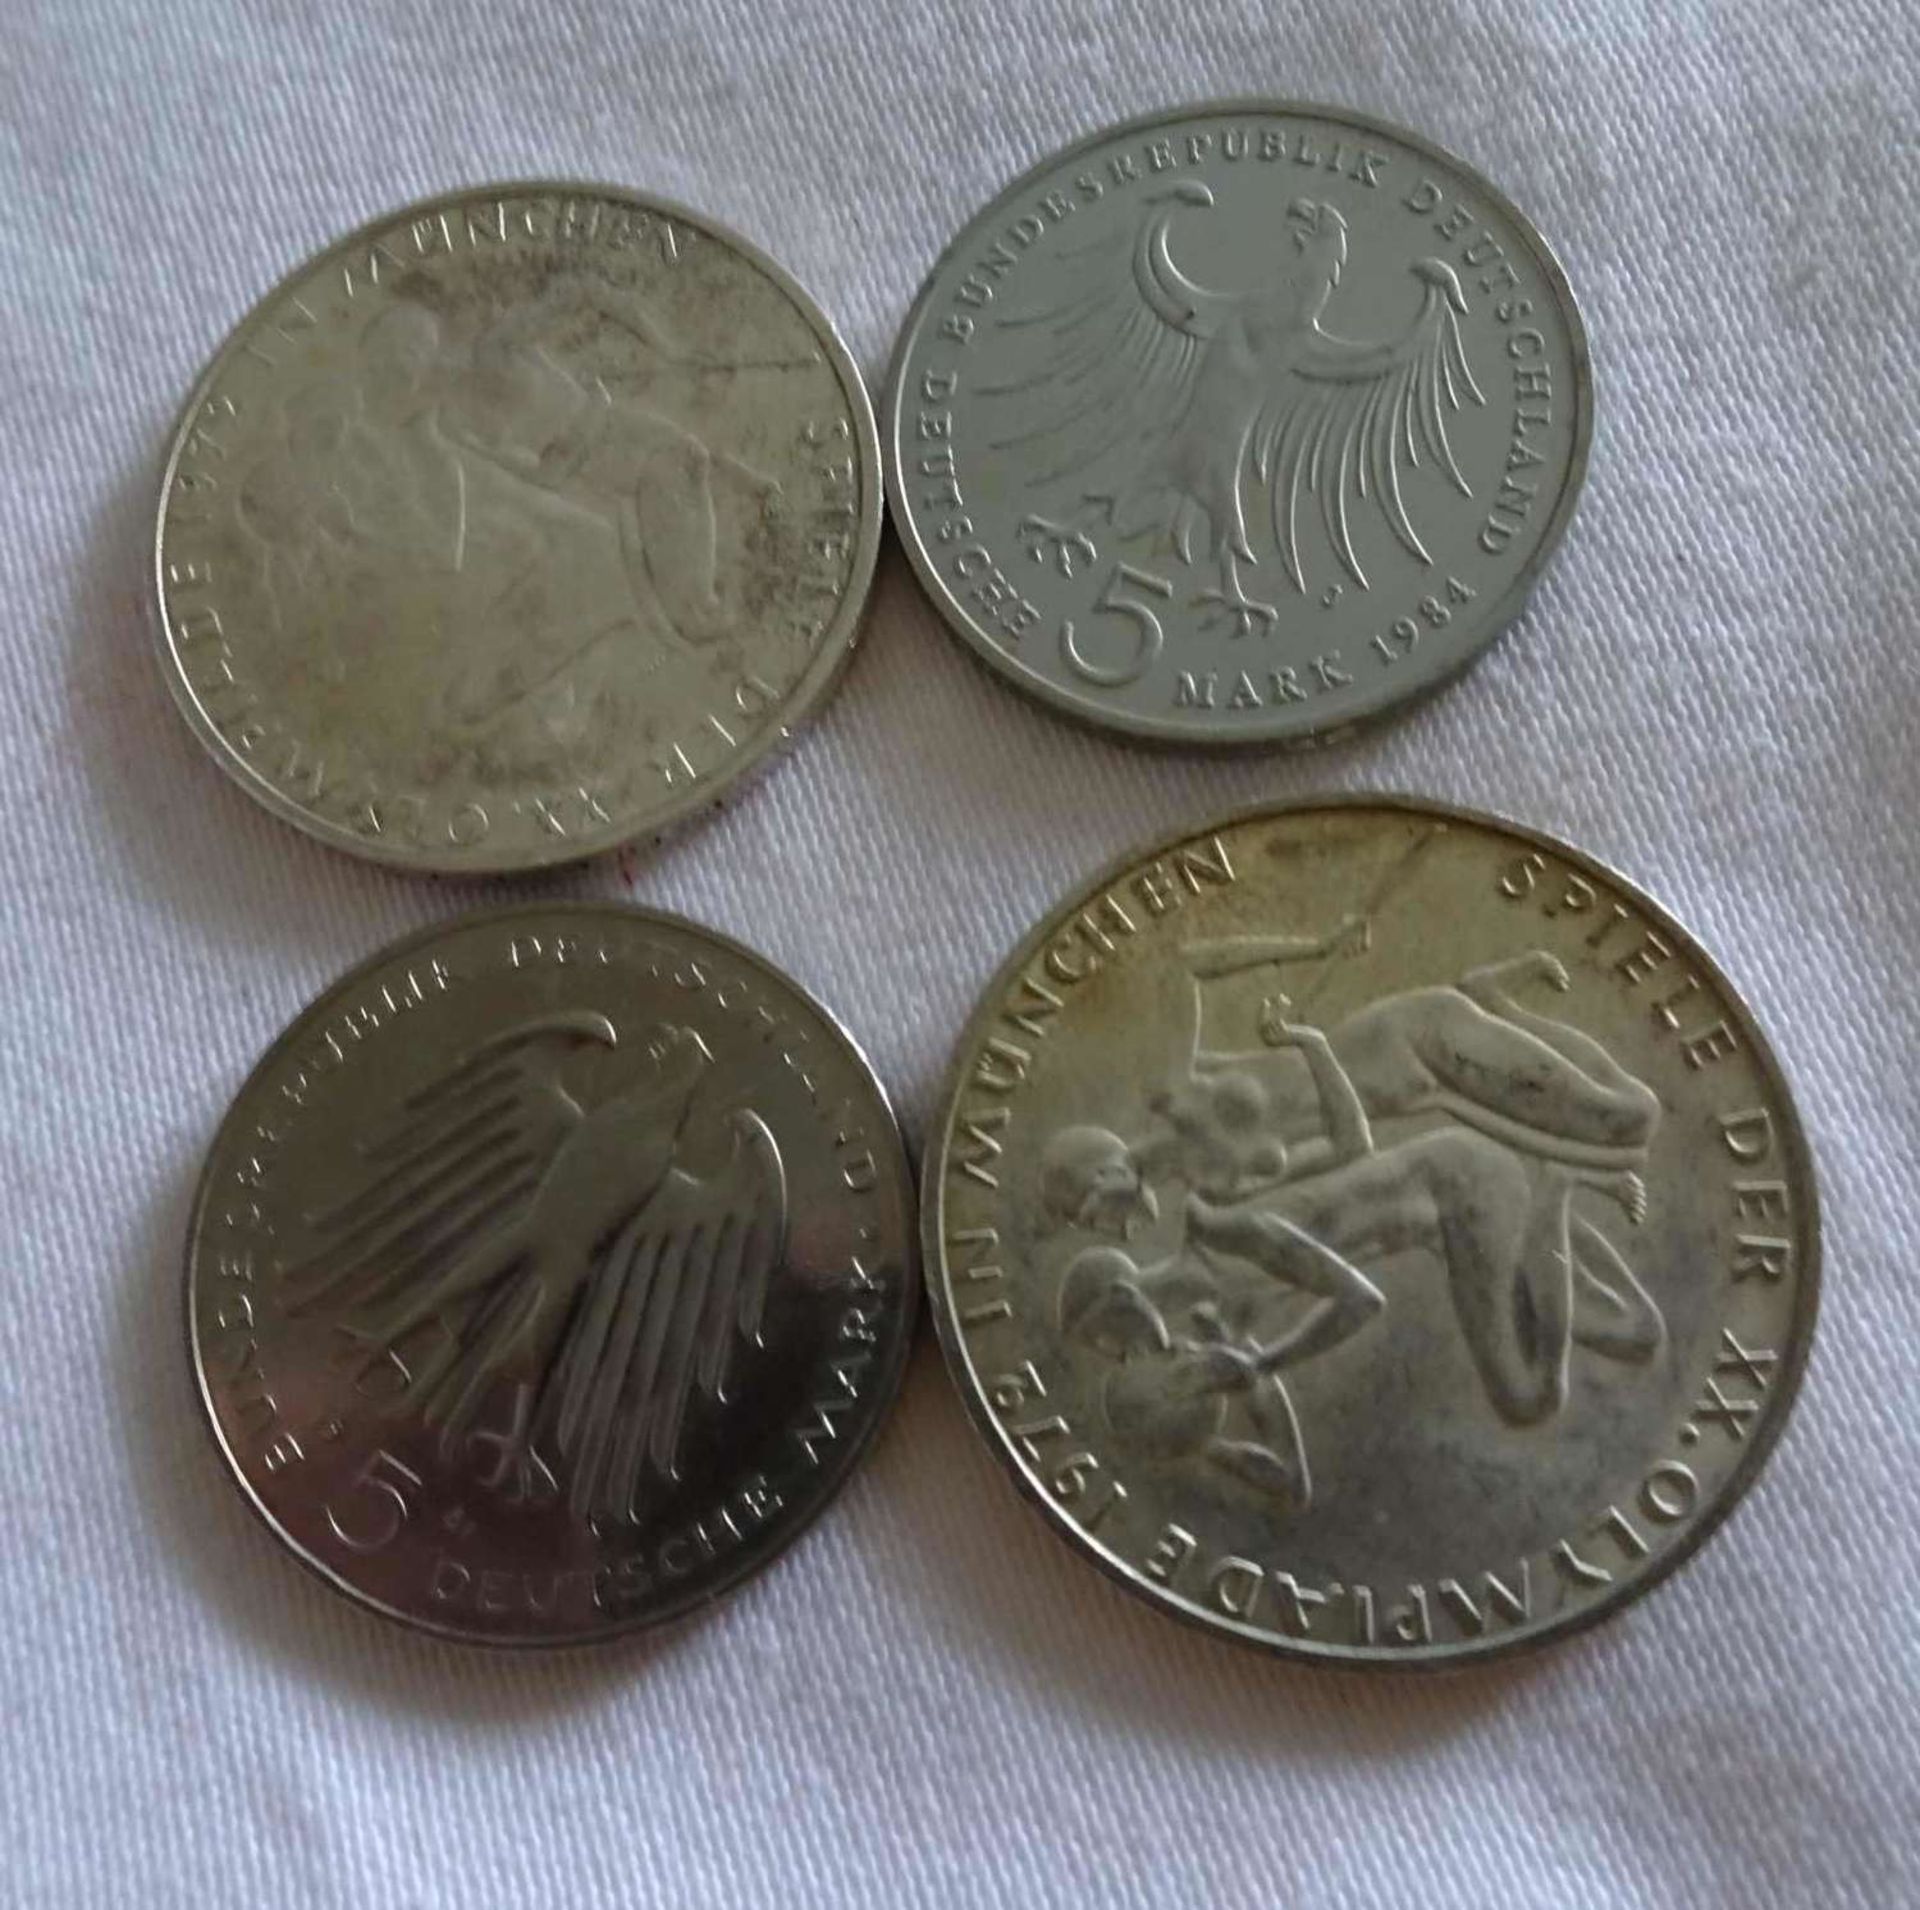 Lot FRG coins, 5 and 10 DM pieces, thereby 61x 5 DM, 15x 10 DM, a total of 455 DM. - Image 4 of 4